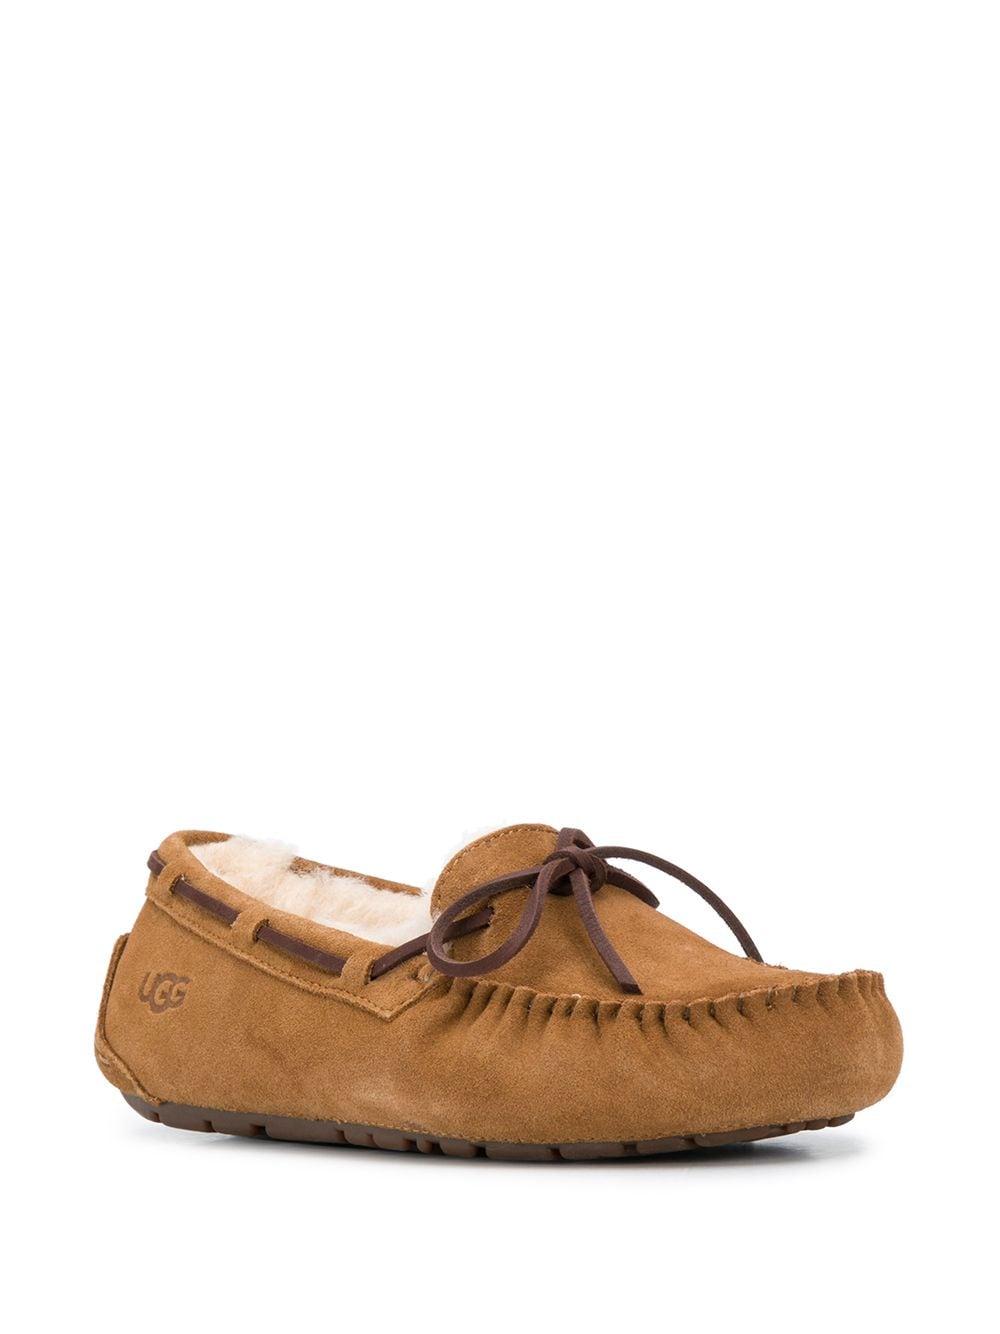 UGG Leather Dakota Loafers in Brown - Lyst